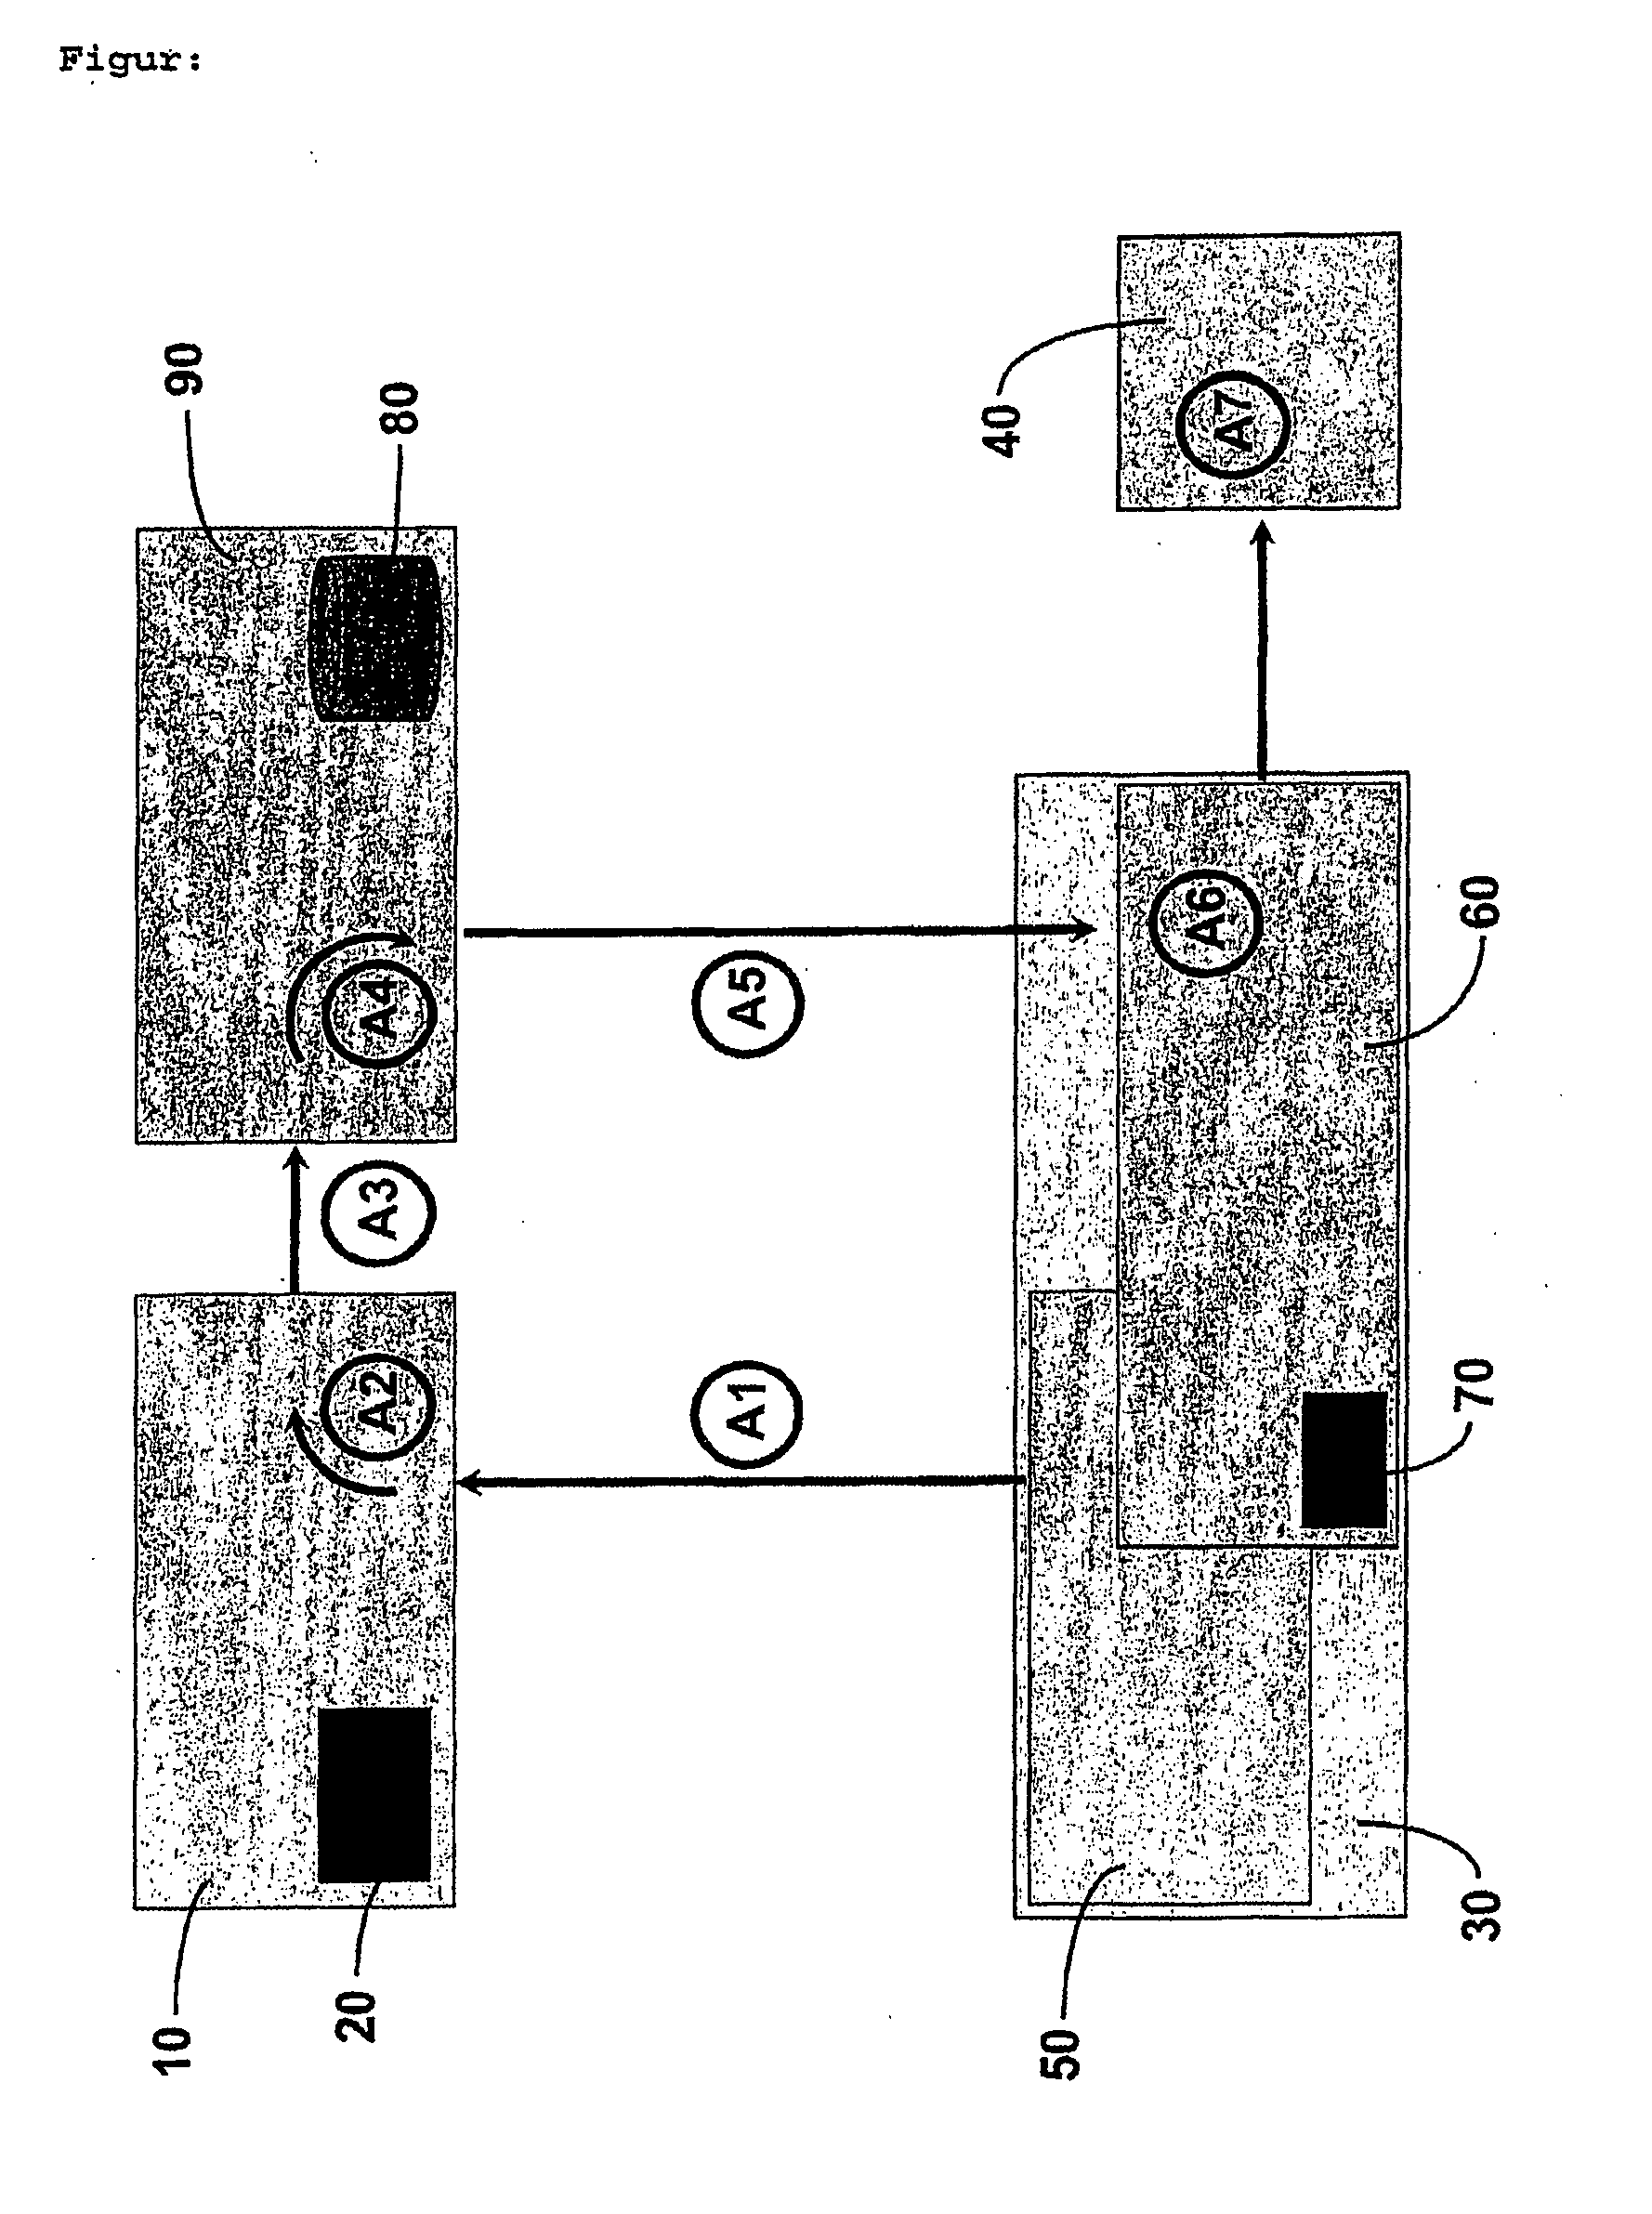 Method and Device for Franking Postal Items